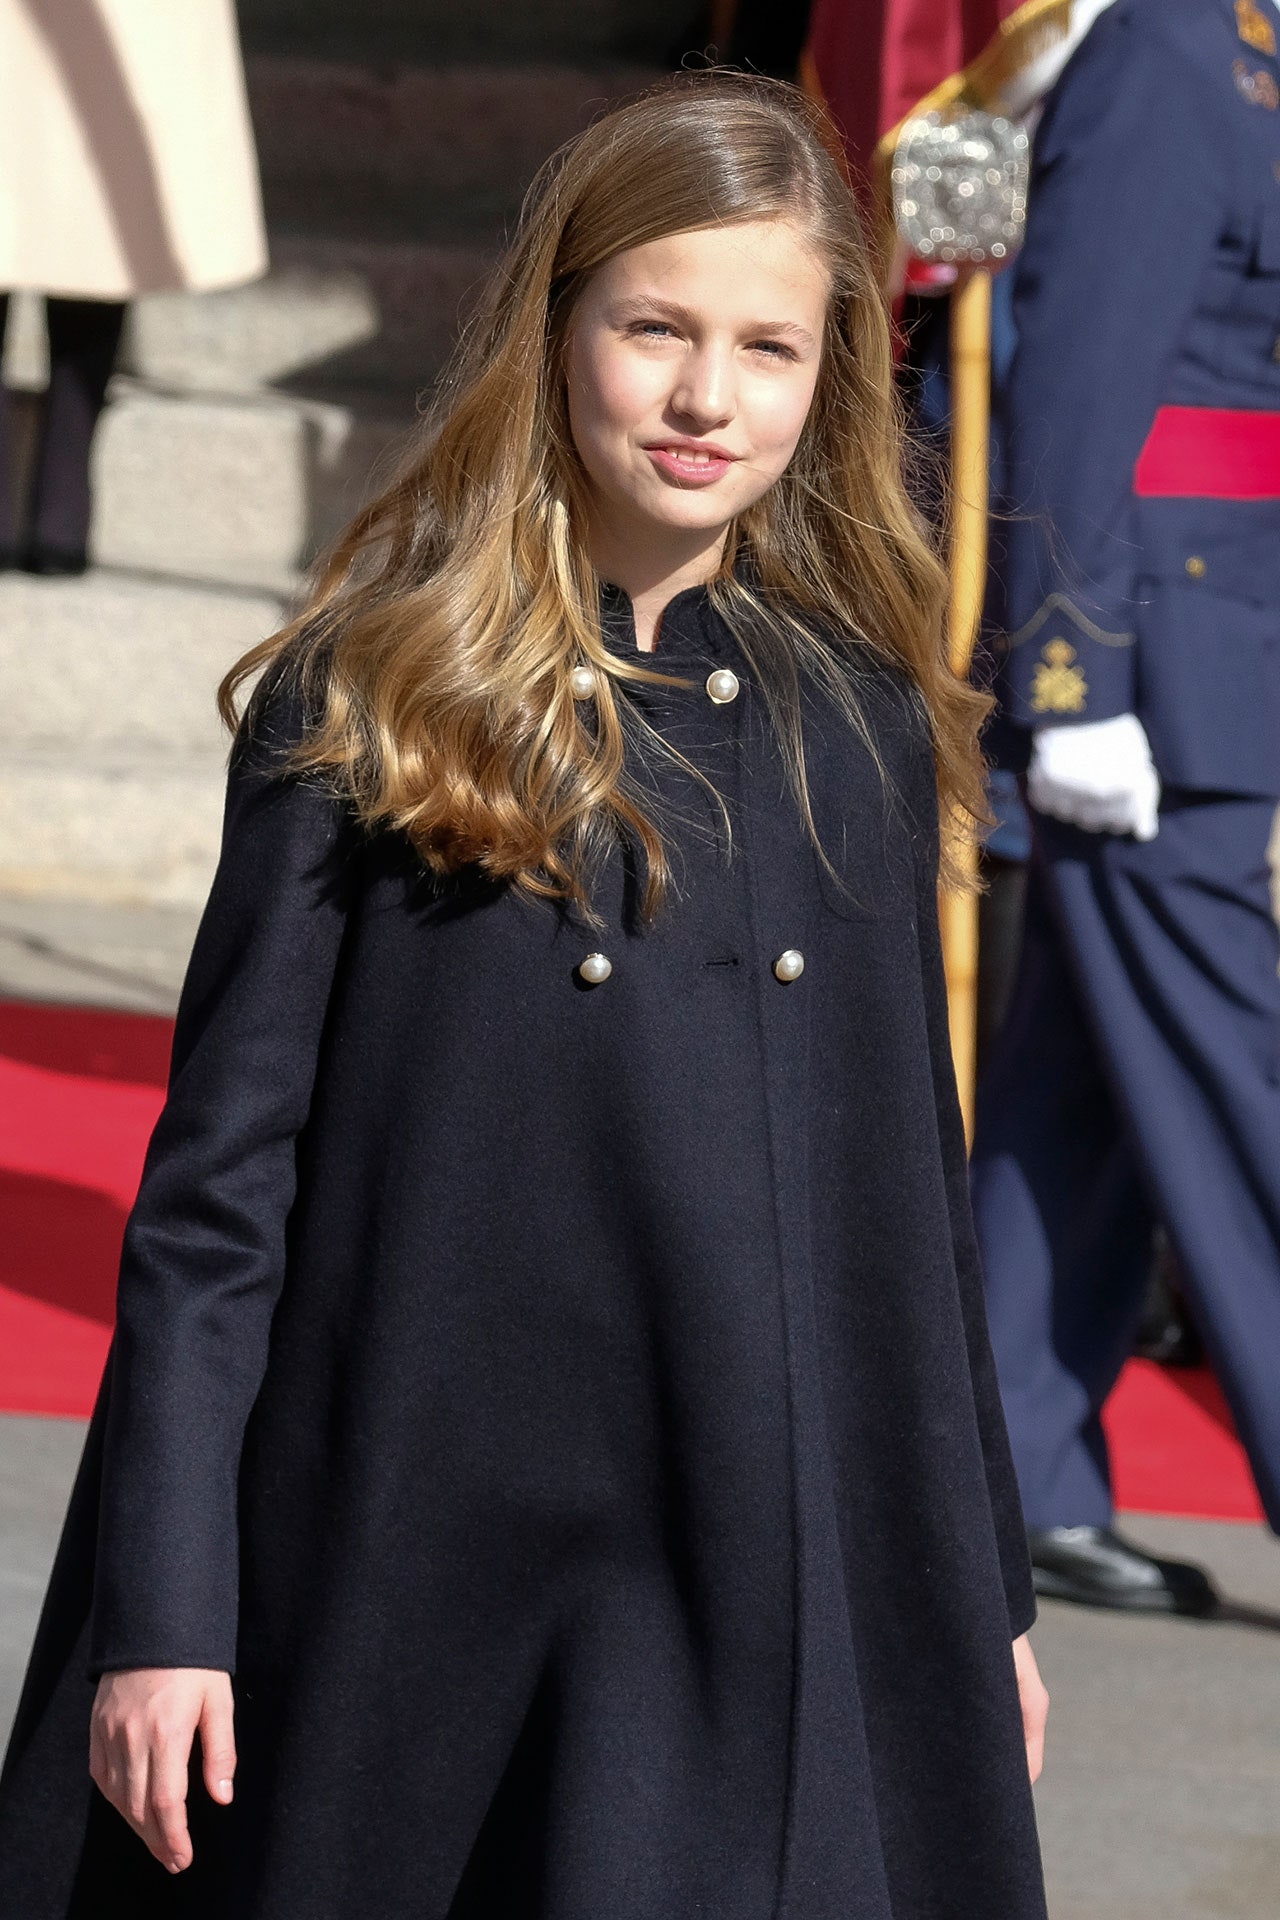 Princess Leonor of Spain, carries out her first solo royal engagement in Madrid